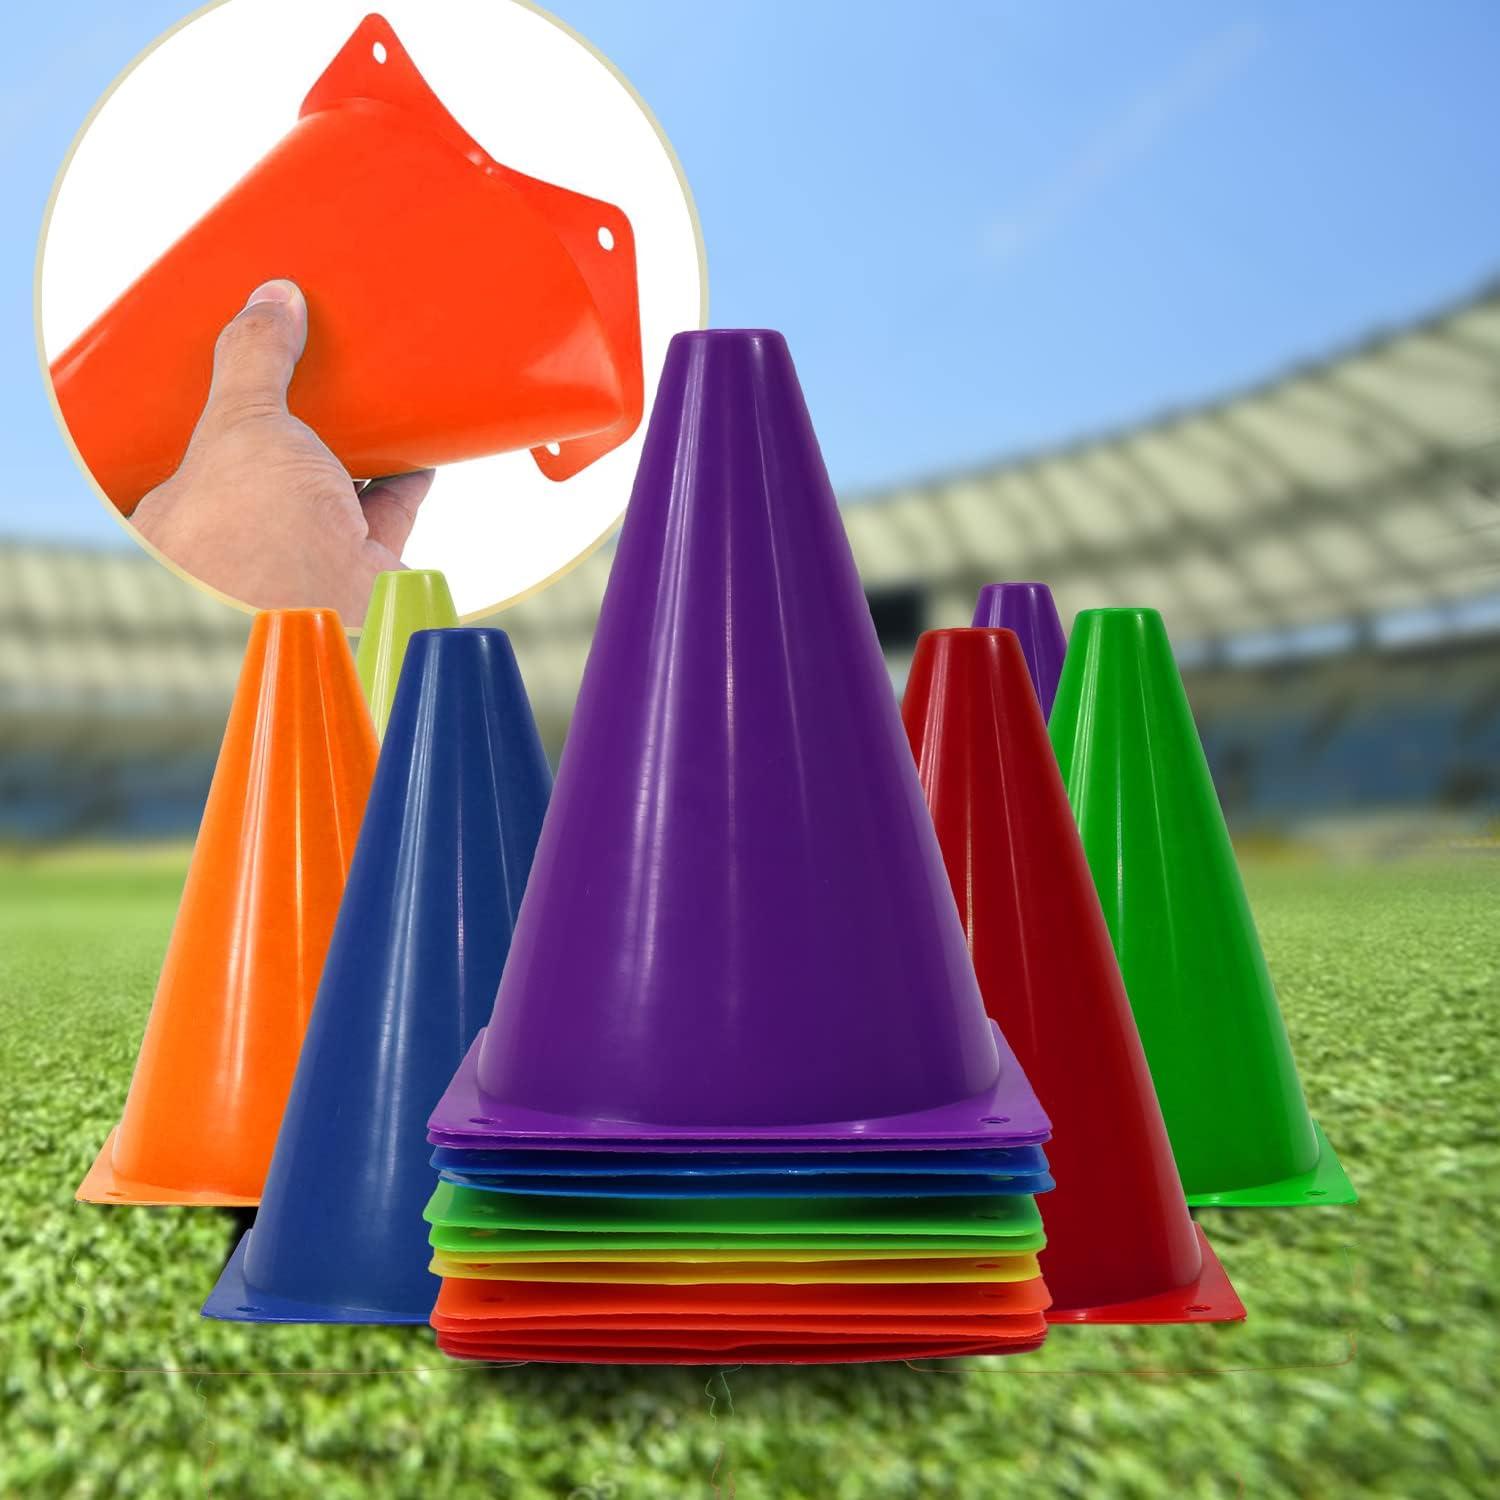 Dazzling Toys Traffic Cones 7 Inch Assorted Colors Plastic Traffic